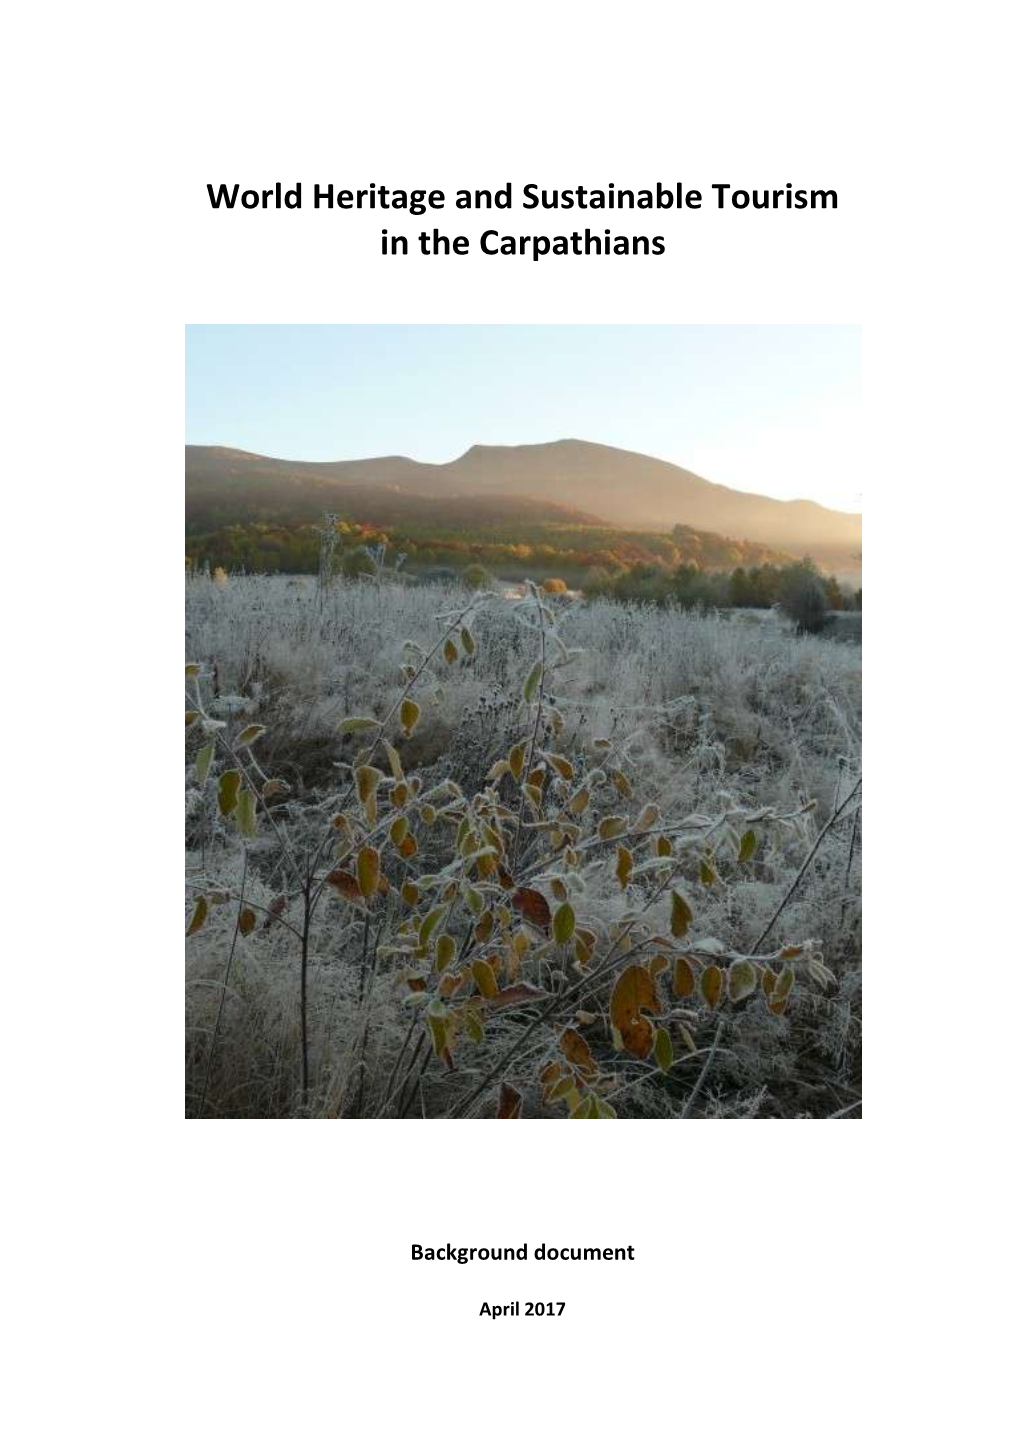 World Heritage and Sustainable Tourism in the Carpathians